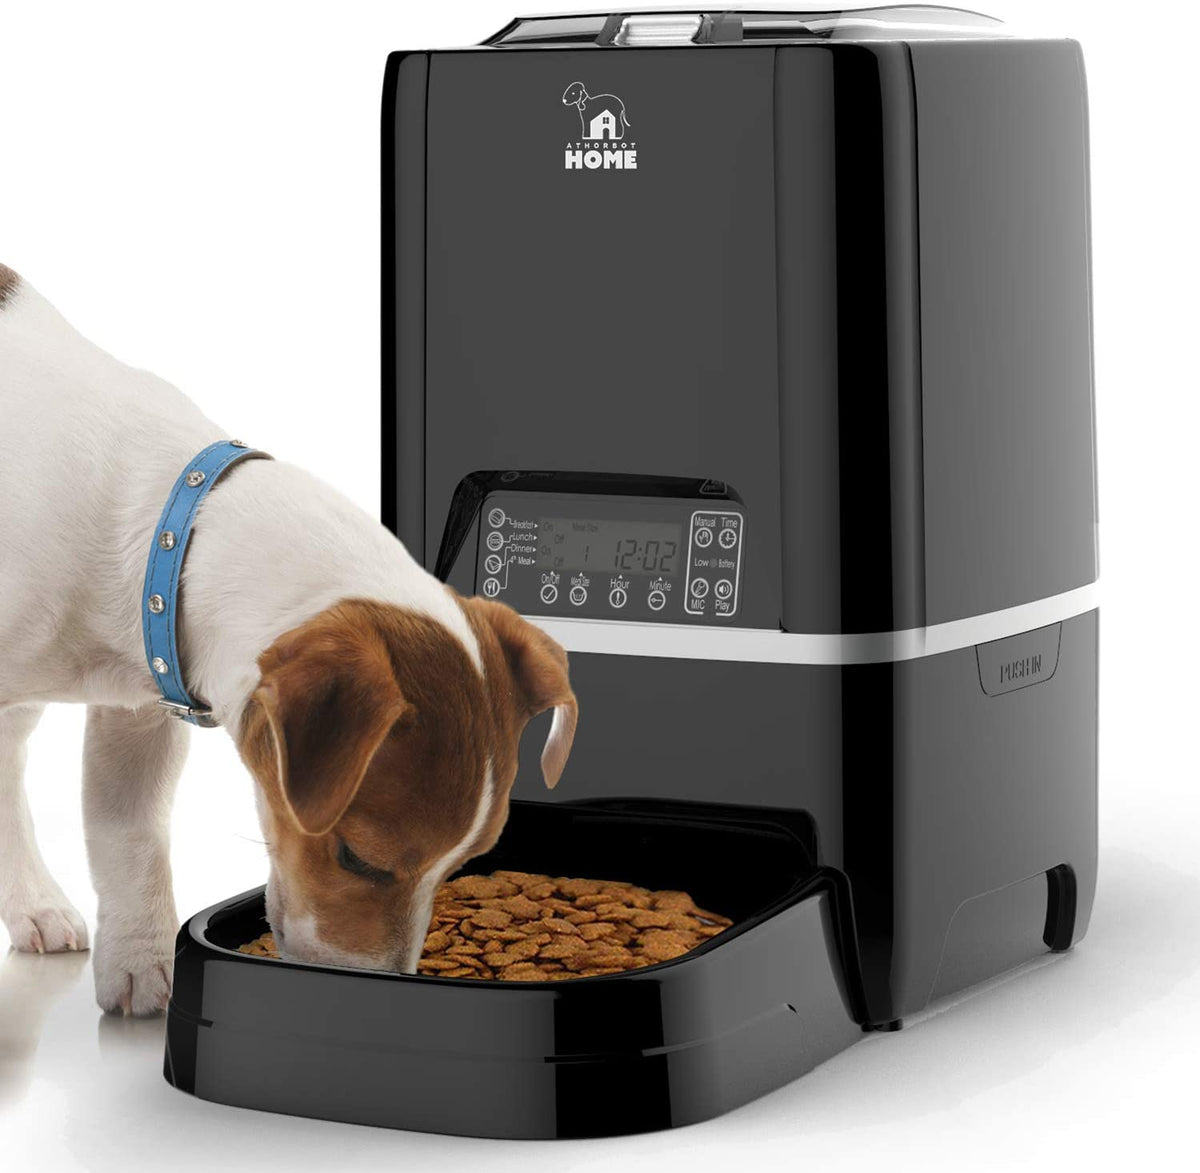 outdoor automatic dog feeder for large dogs